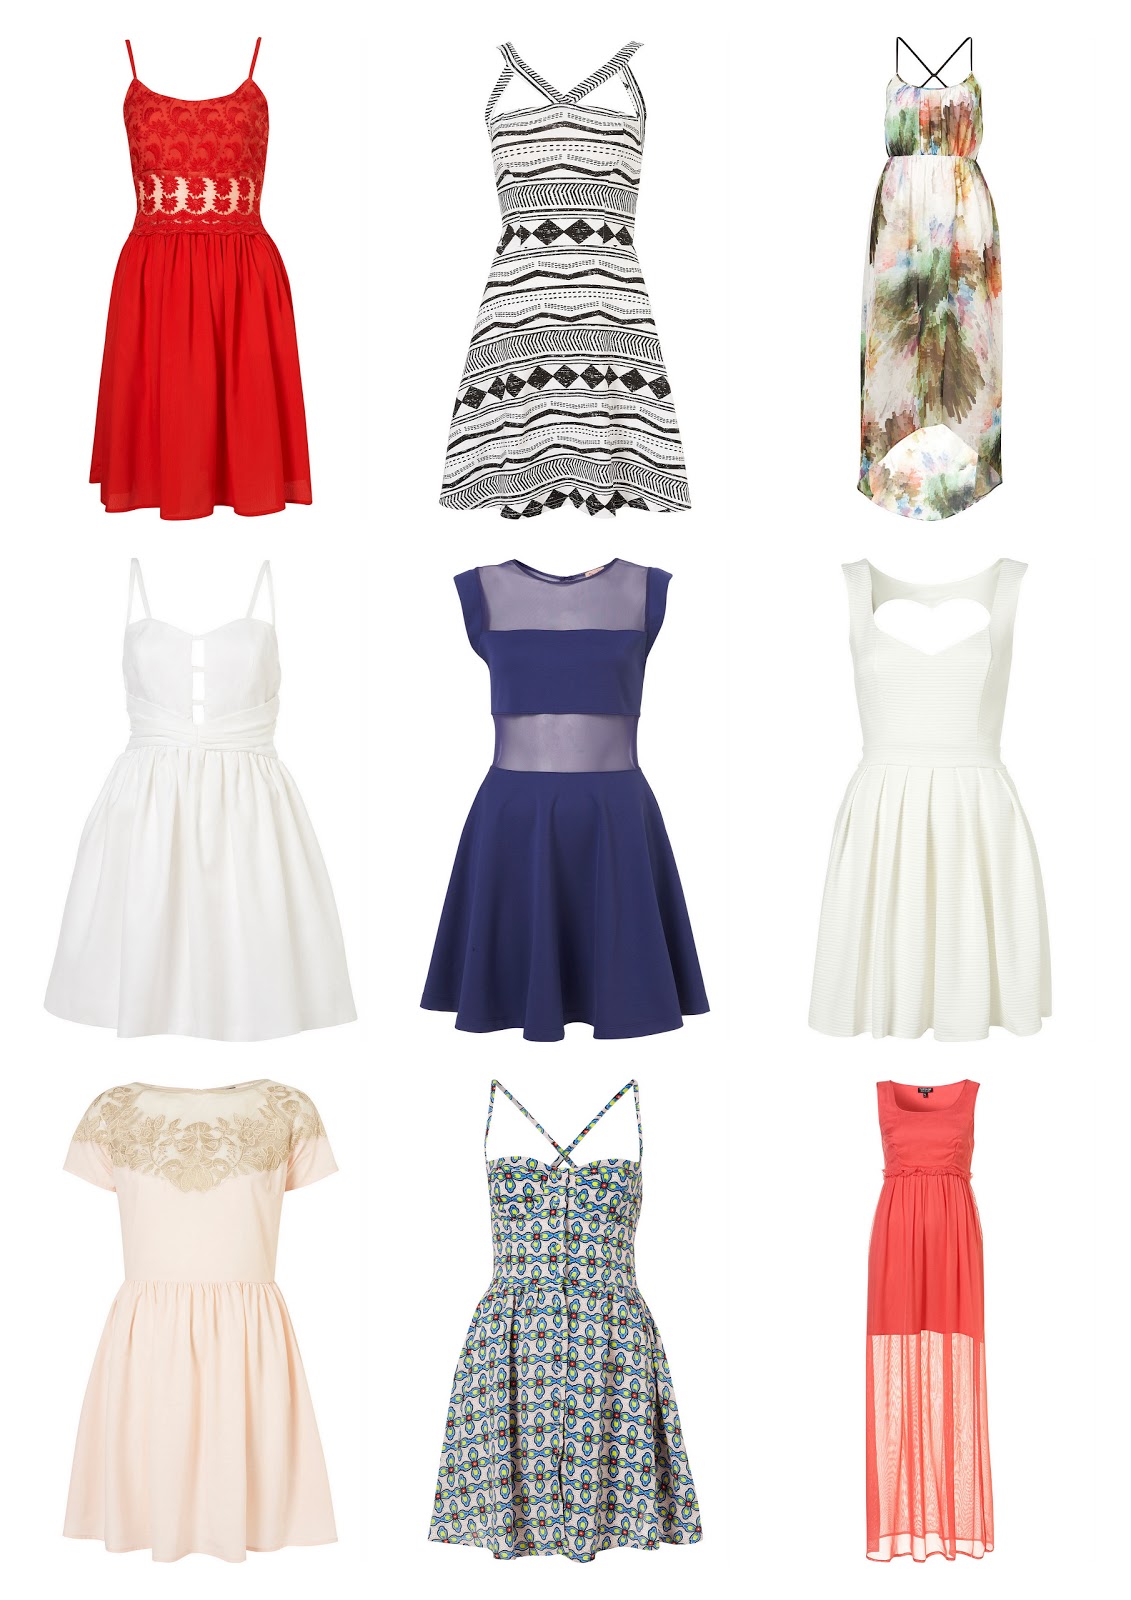 Paint Me Chic: Adorable Summer Dresses from TopShop